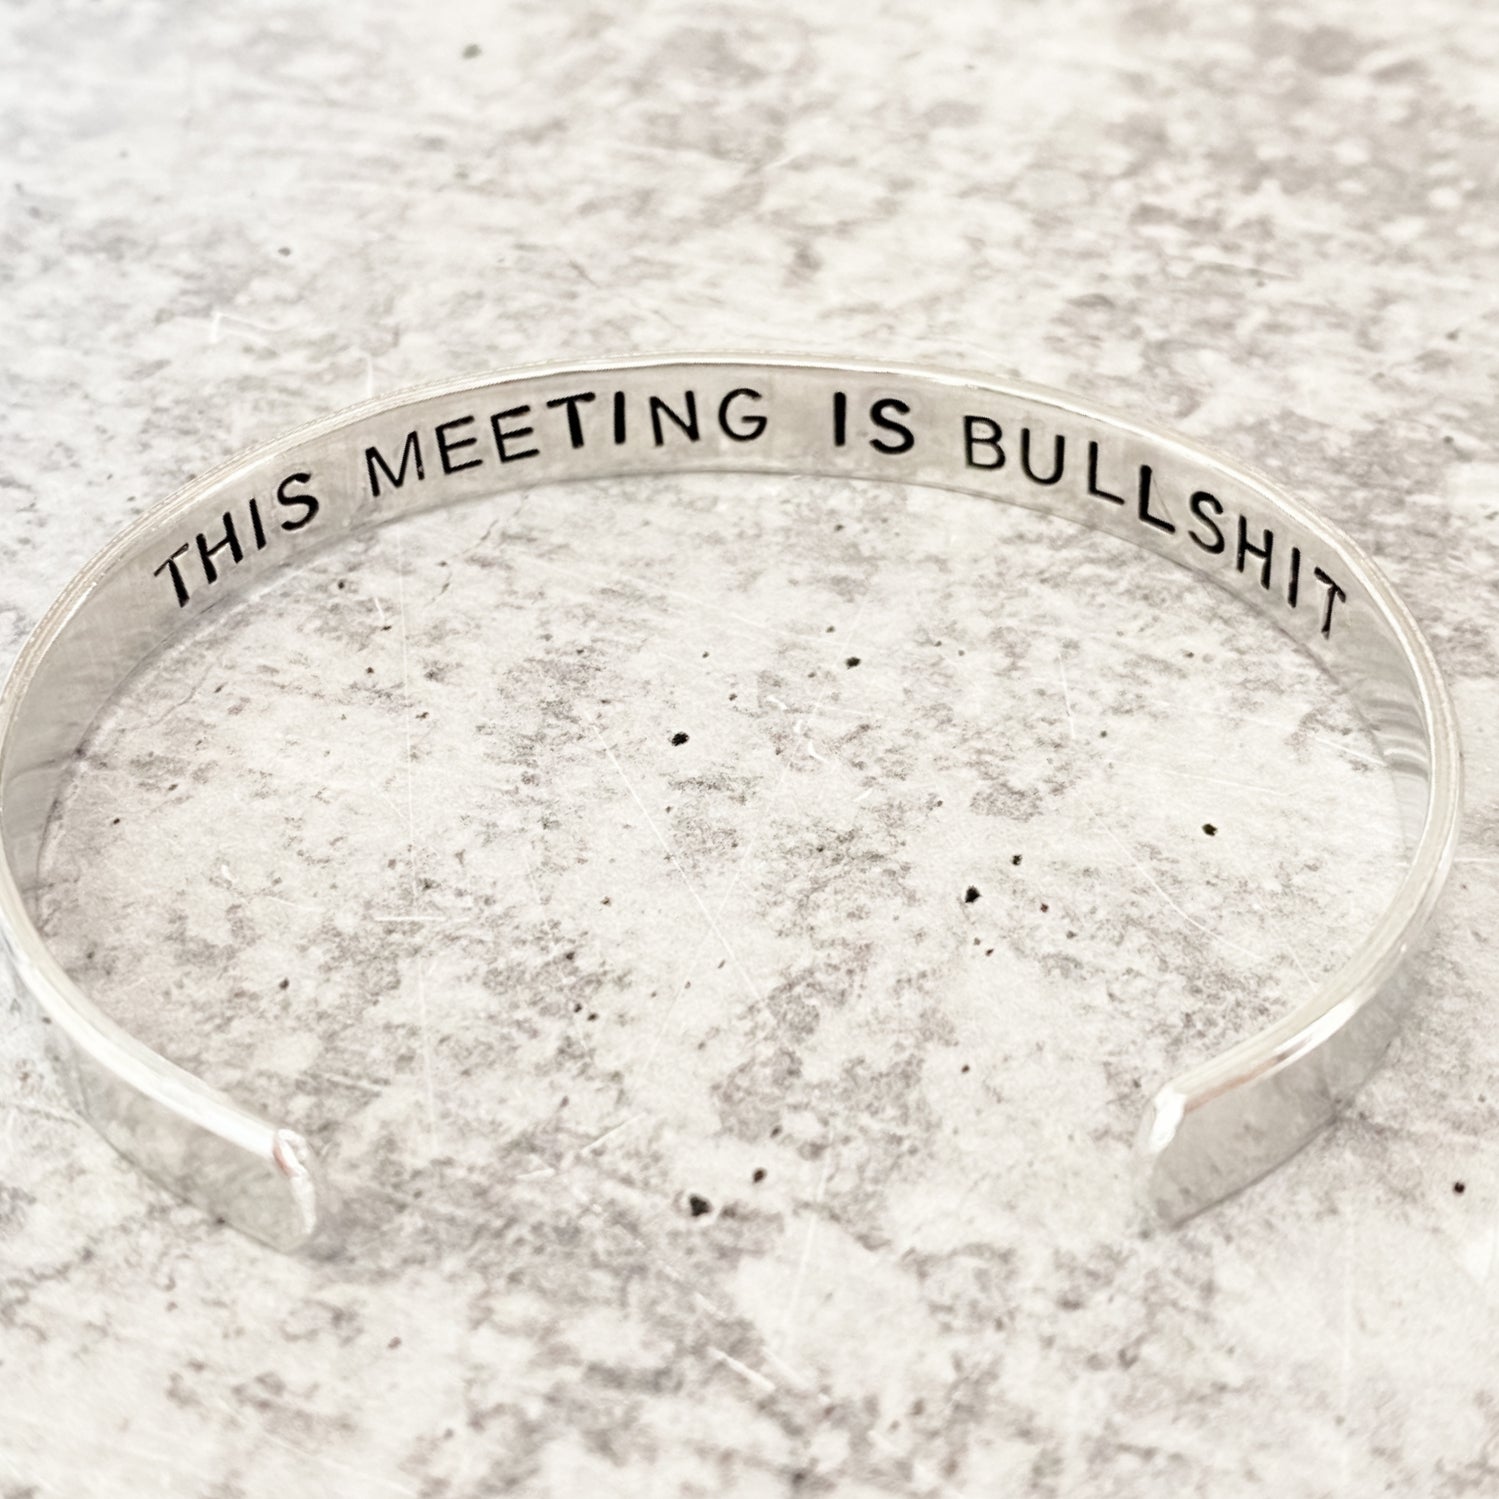 THIS MEETING IS BULLSHIT Stacking Cuff Bracelet Salt and Sparkle